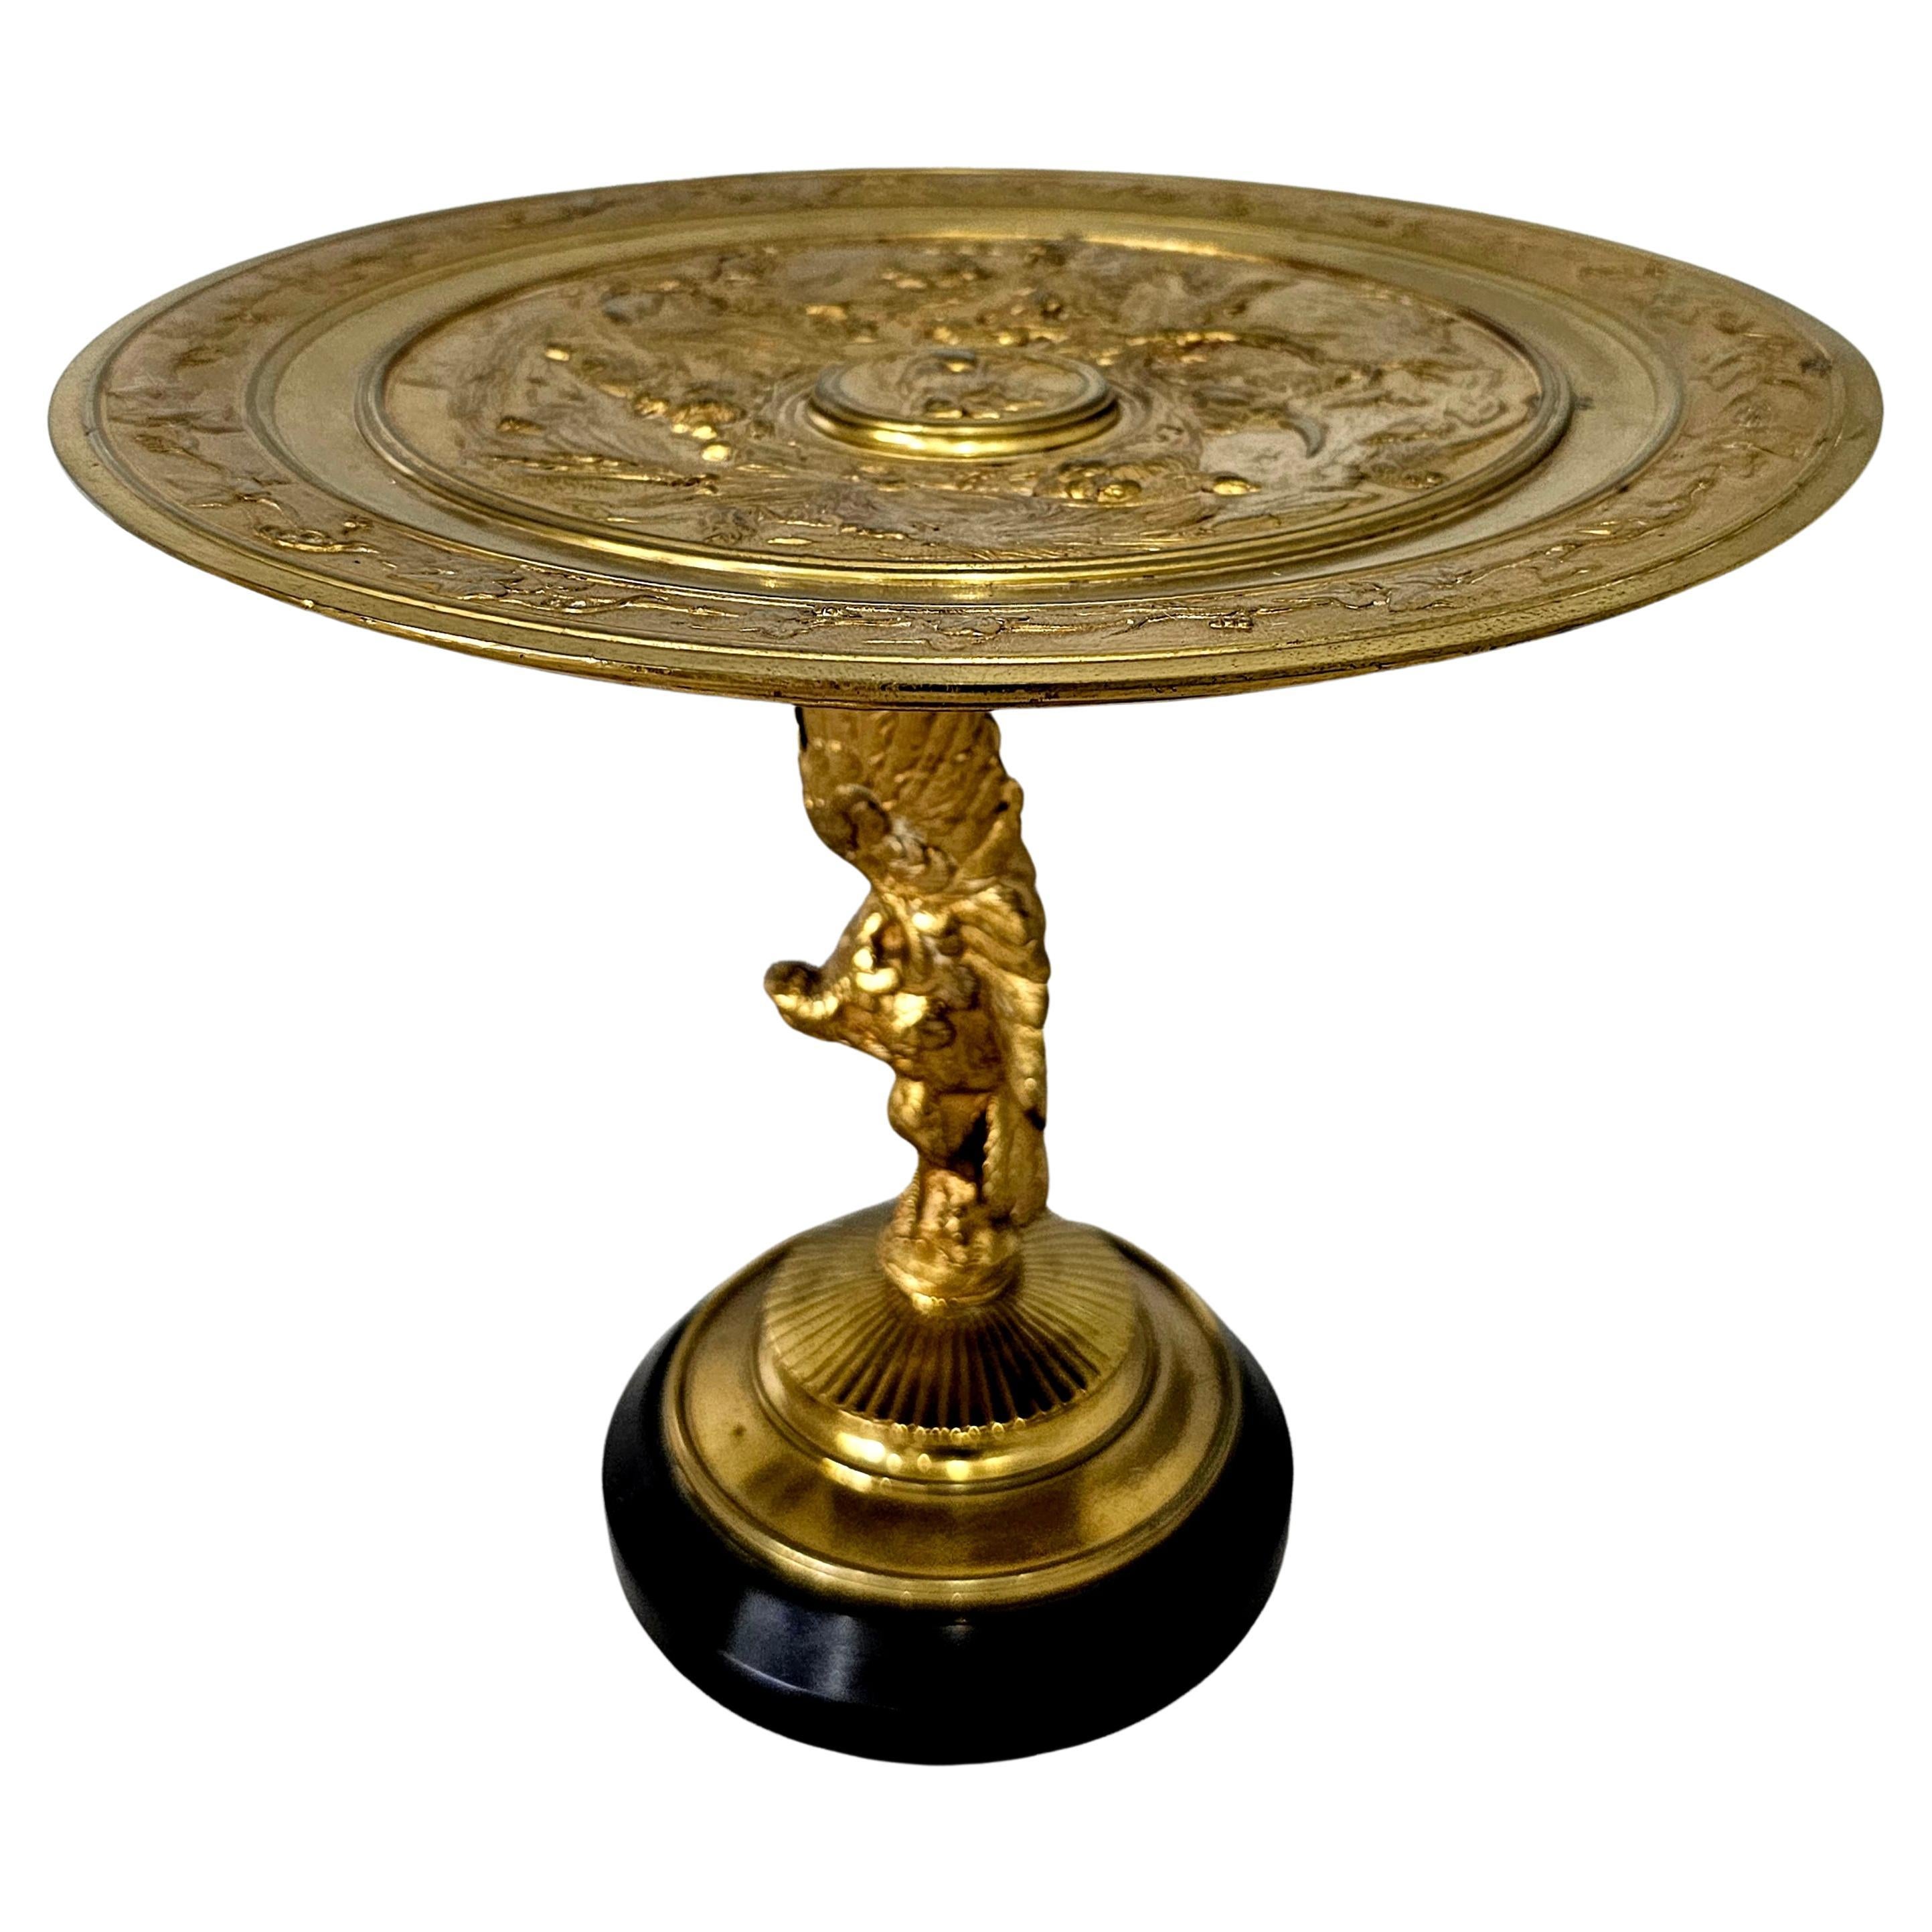 19th C. Renaissance Gilt Bronze Sculptural Tazza Signed E. Cana 1845-1895 French For Sale 1